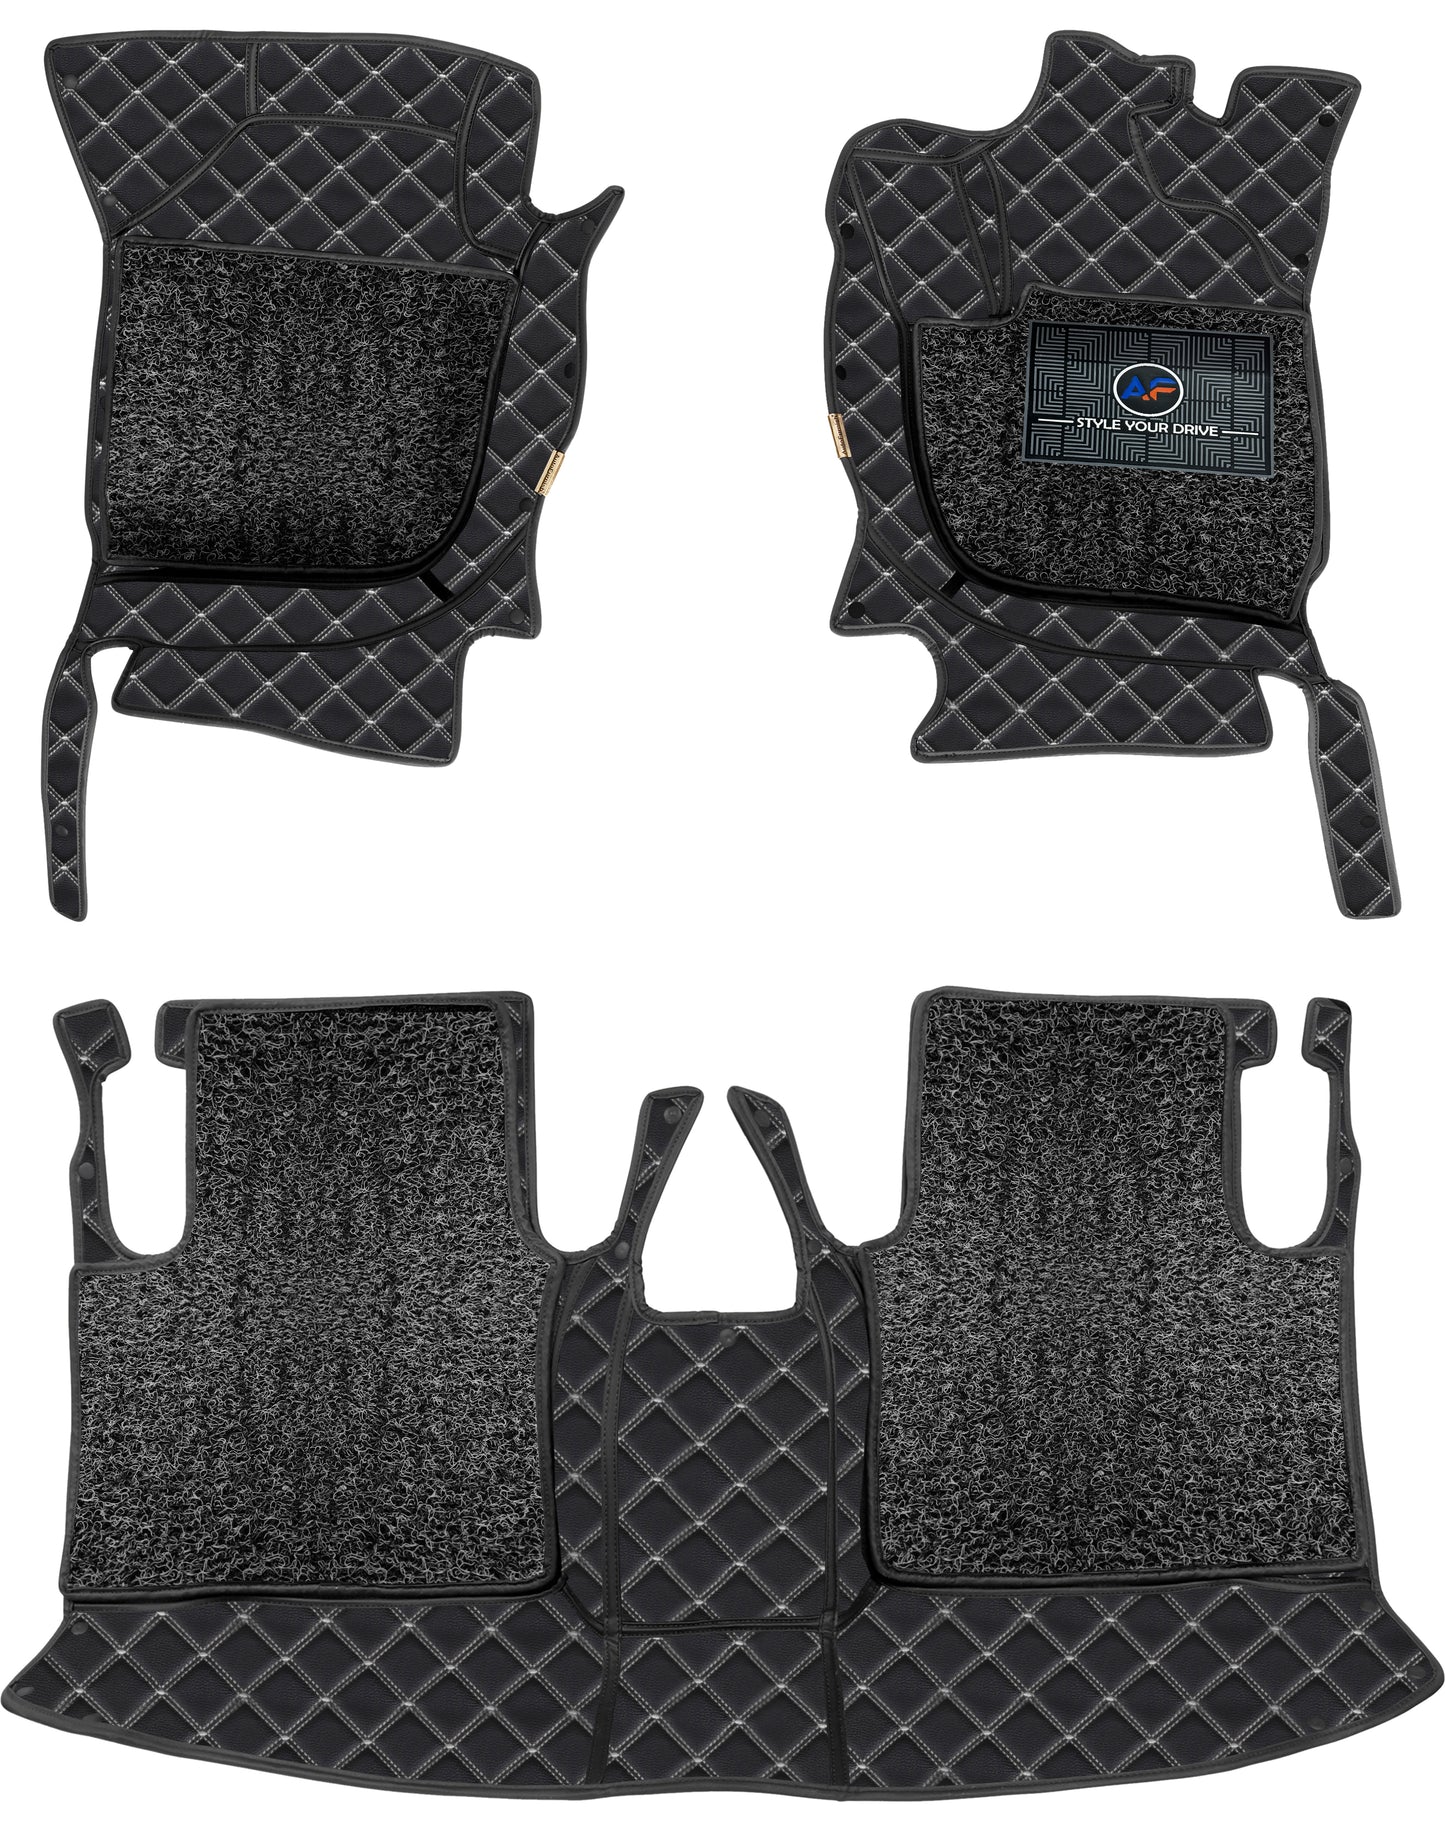 KIA EV6 2022-7D Luxury Car Mat, All Weather Proof, Anti-Skid, 100% Waterproof & Odorless with Unique Diamond Fish Design (24mm Luxury PU Leather, 2 Rows)